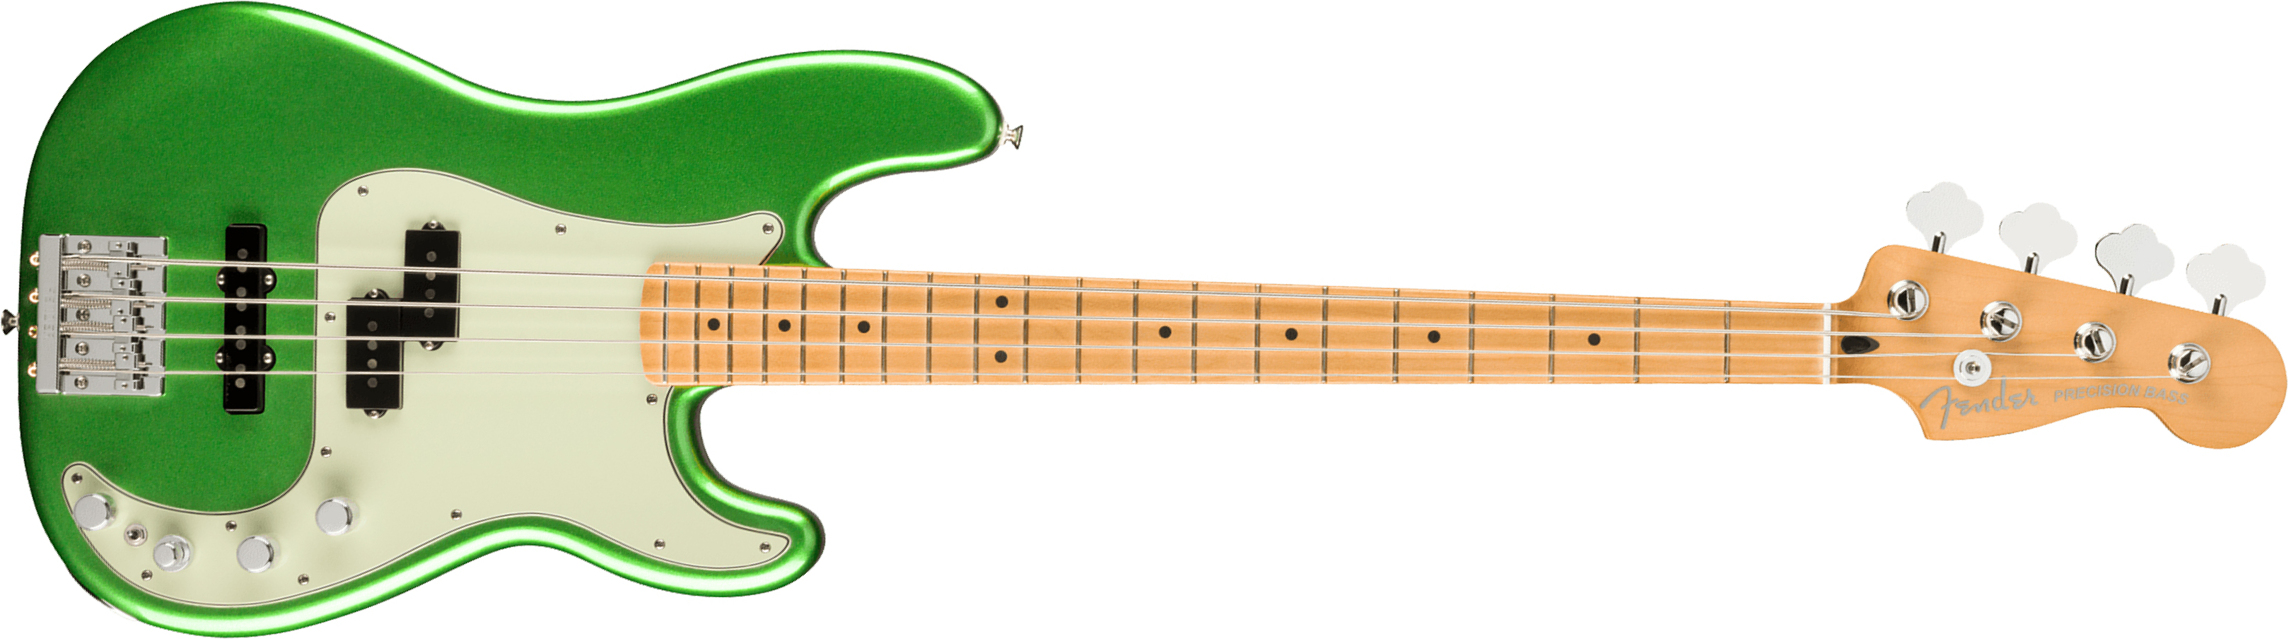 Fender Precision Bass Player Plus Mex Active Mn - Cosmic Jade - Solid body elektrische bas - Main picture